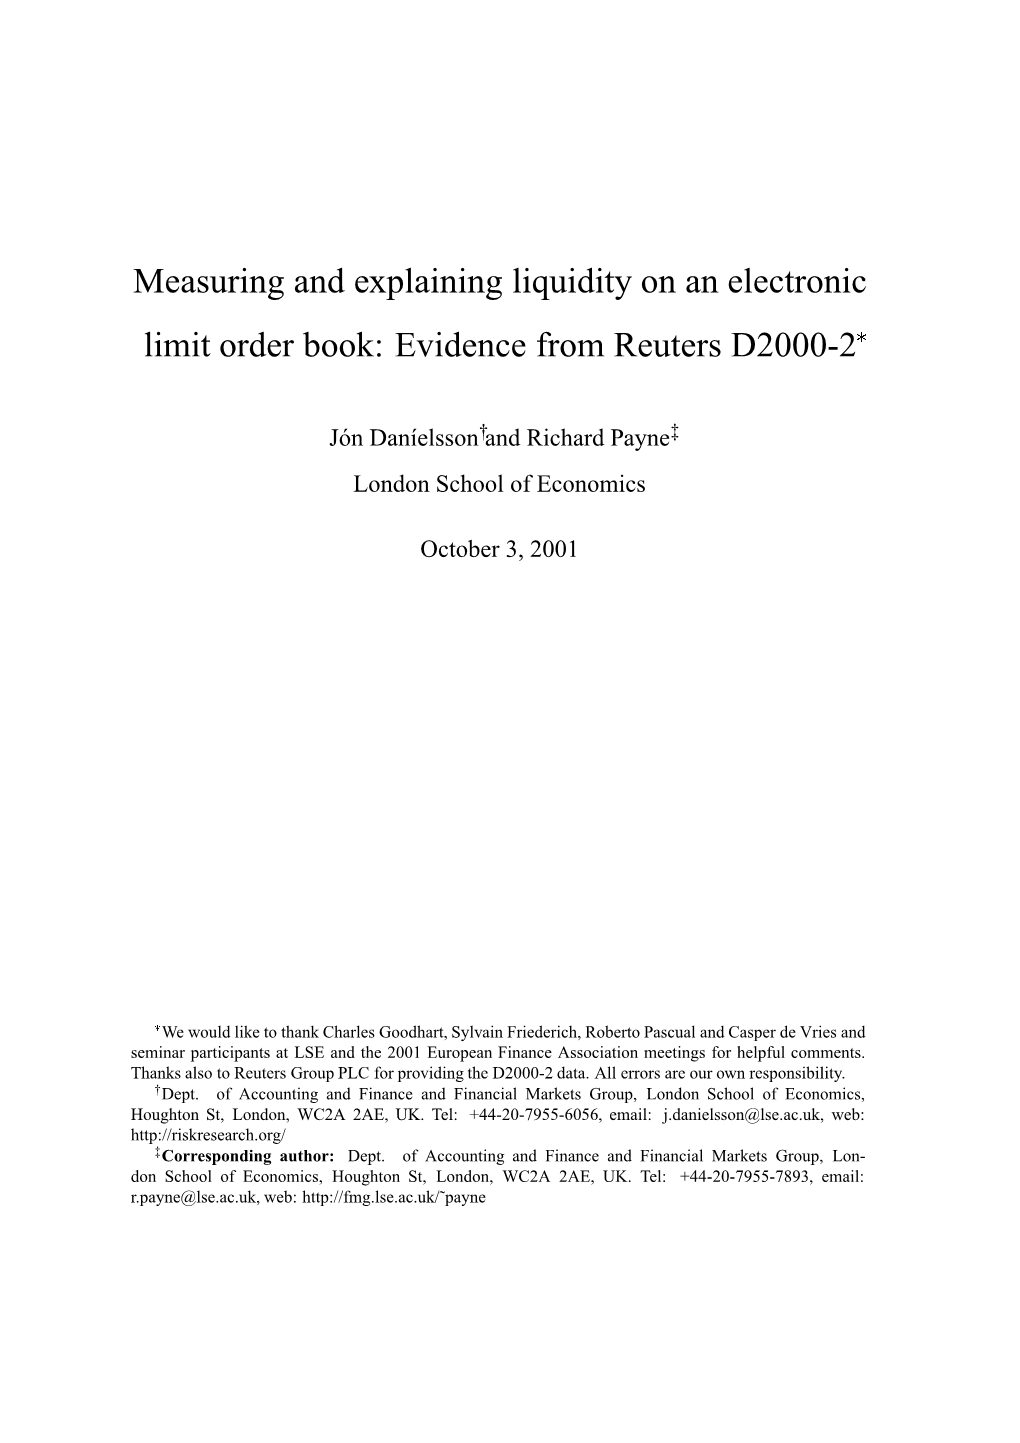 Measuring and Explaining Liquidity on an Electronic Limit Order Book